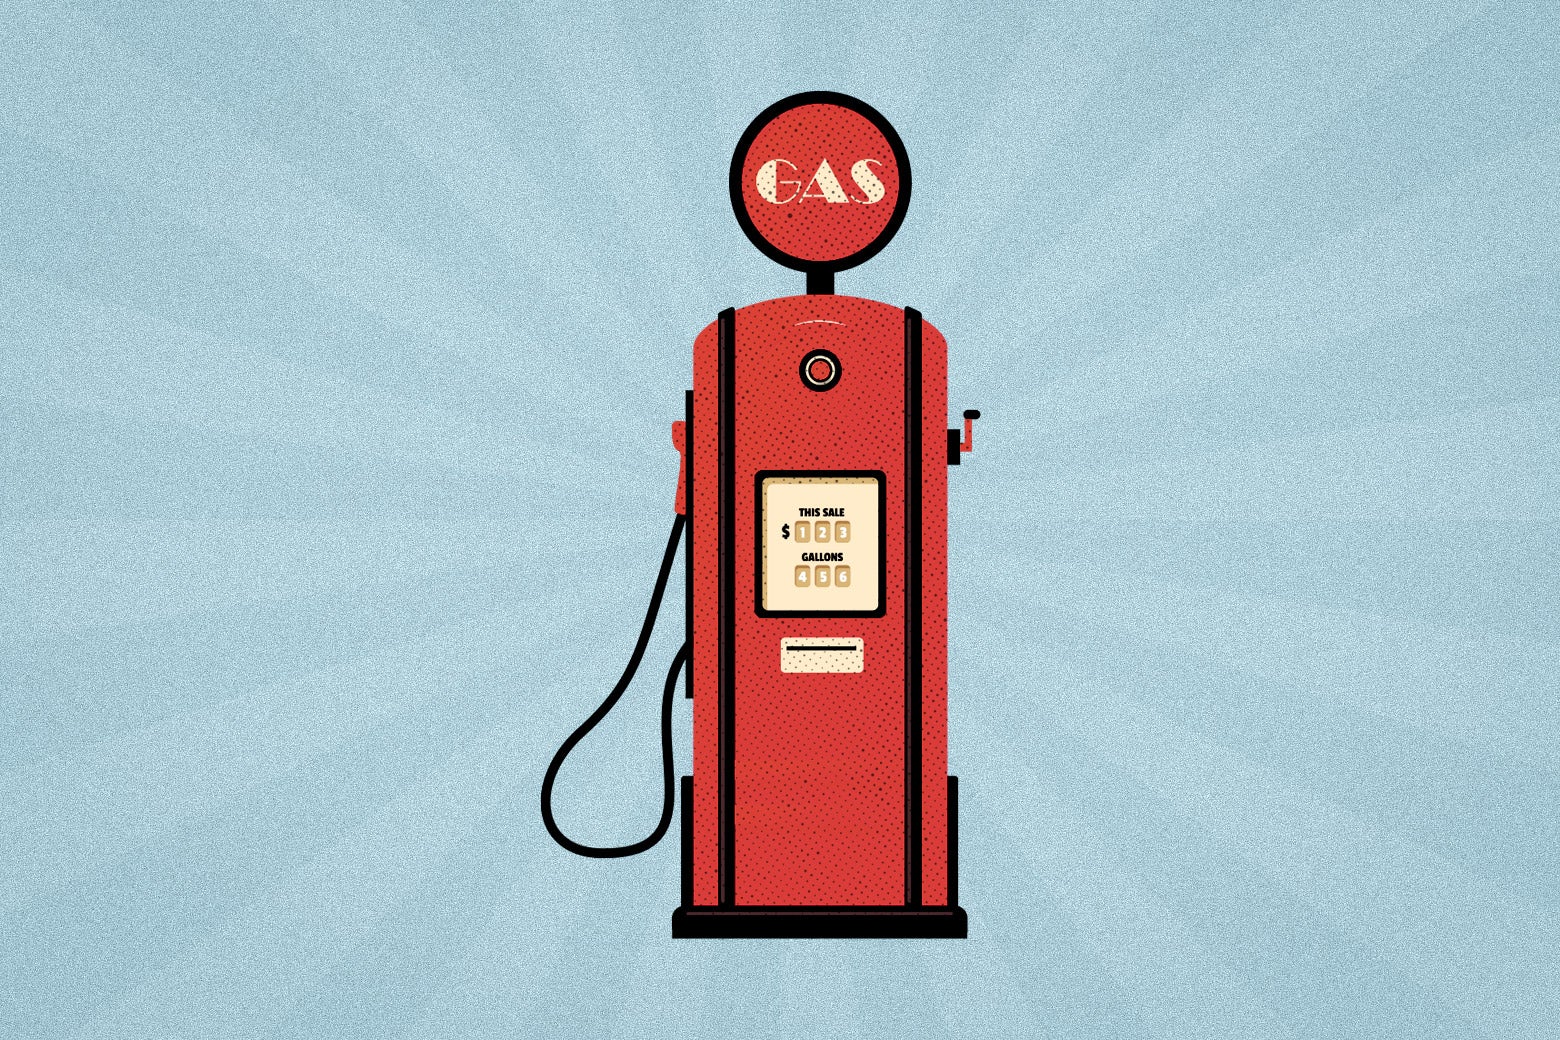 An illustration of an old-fashioned gas pump.